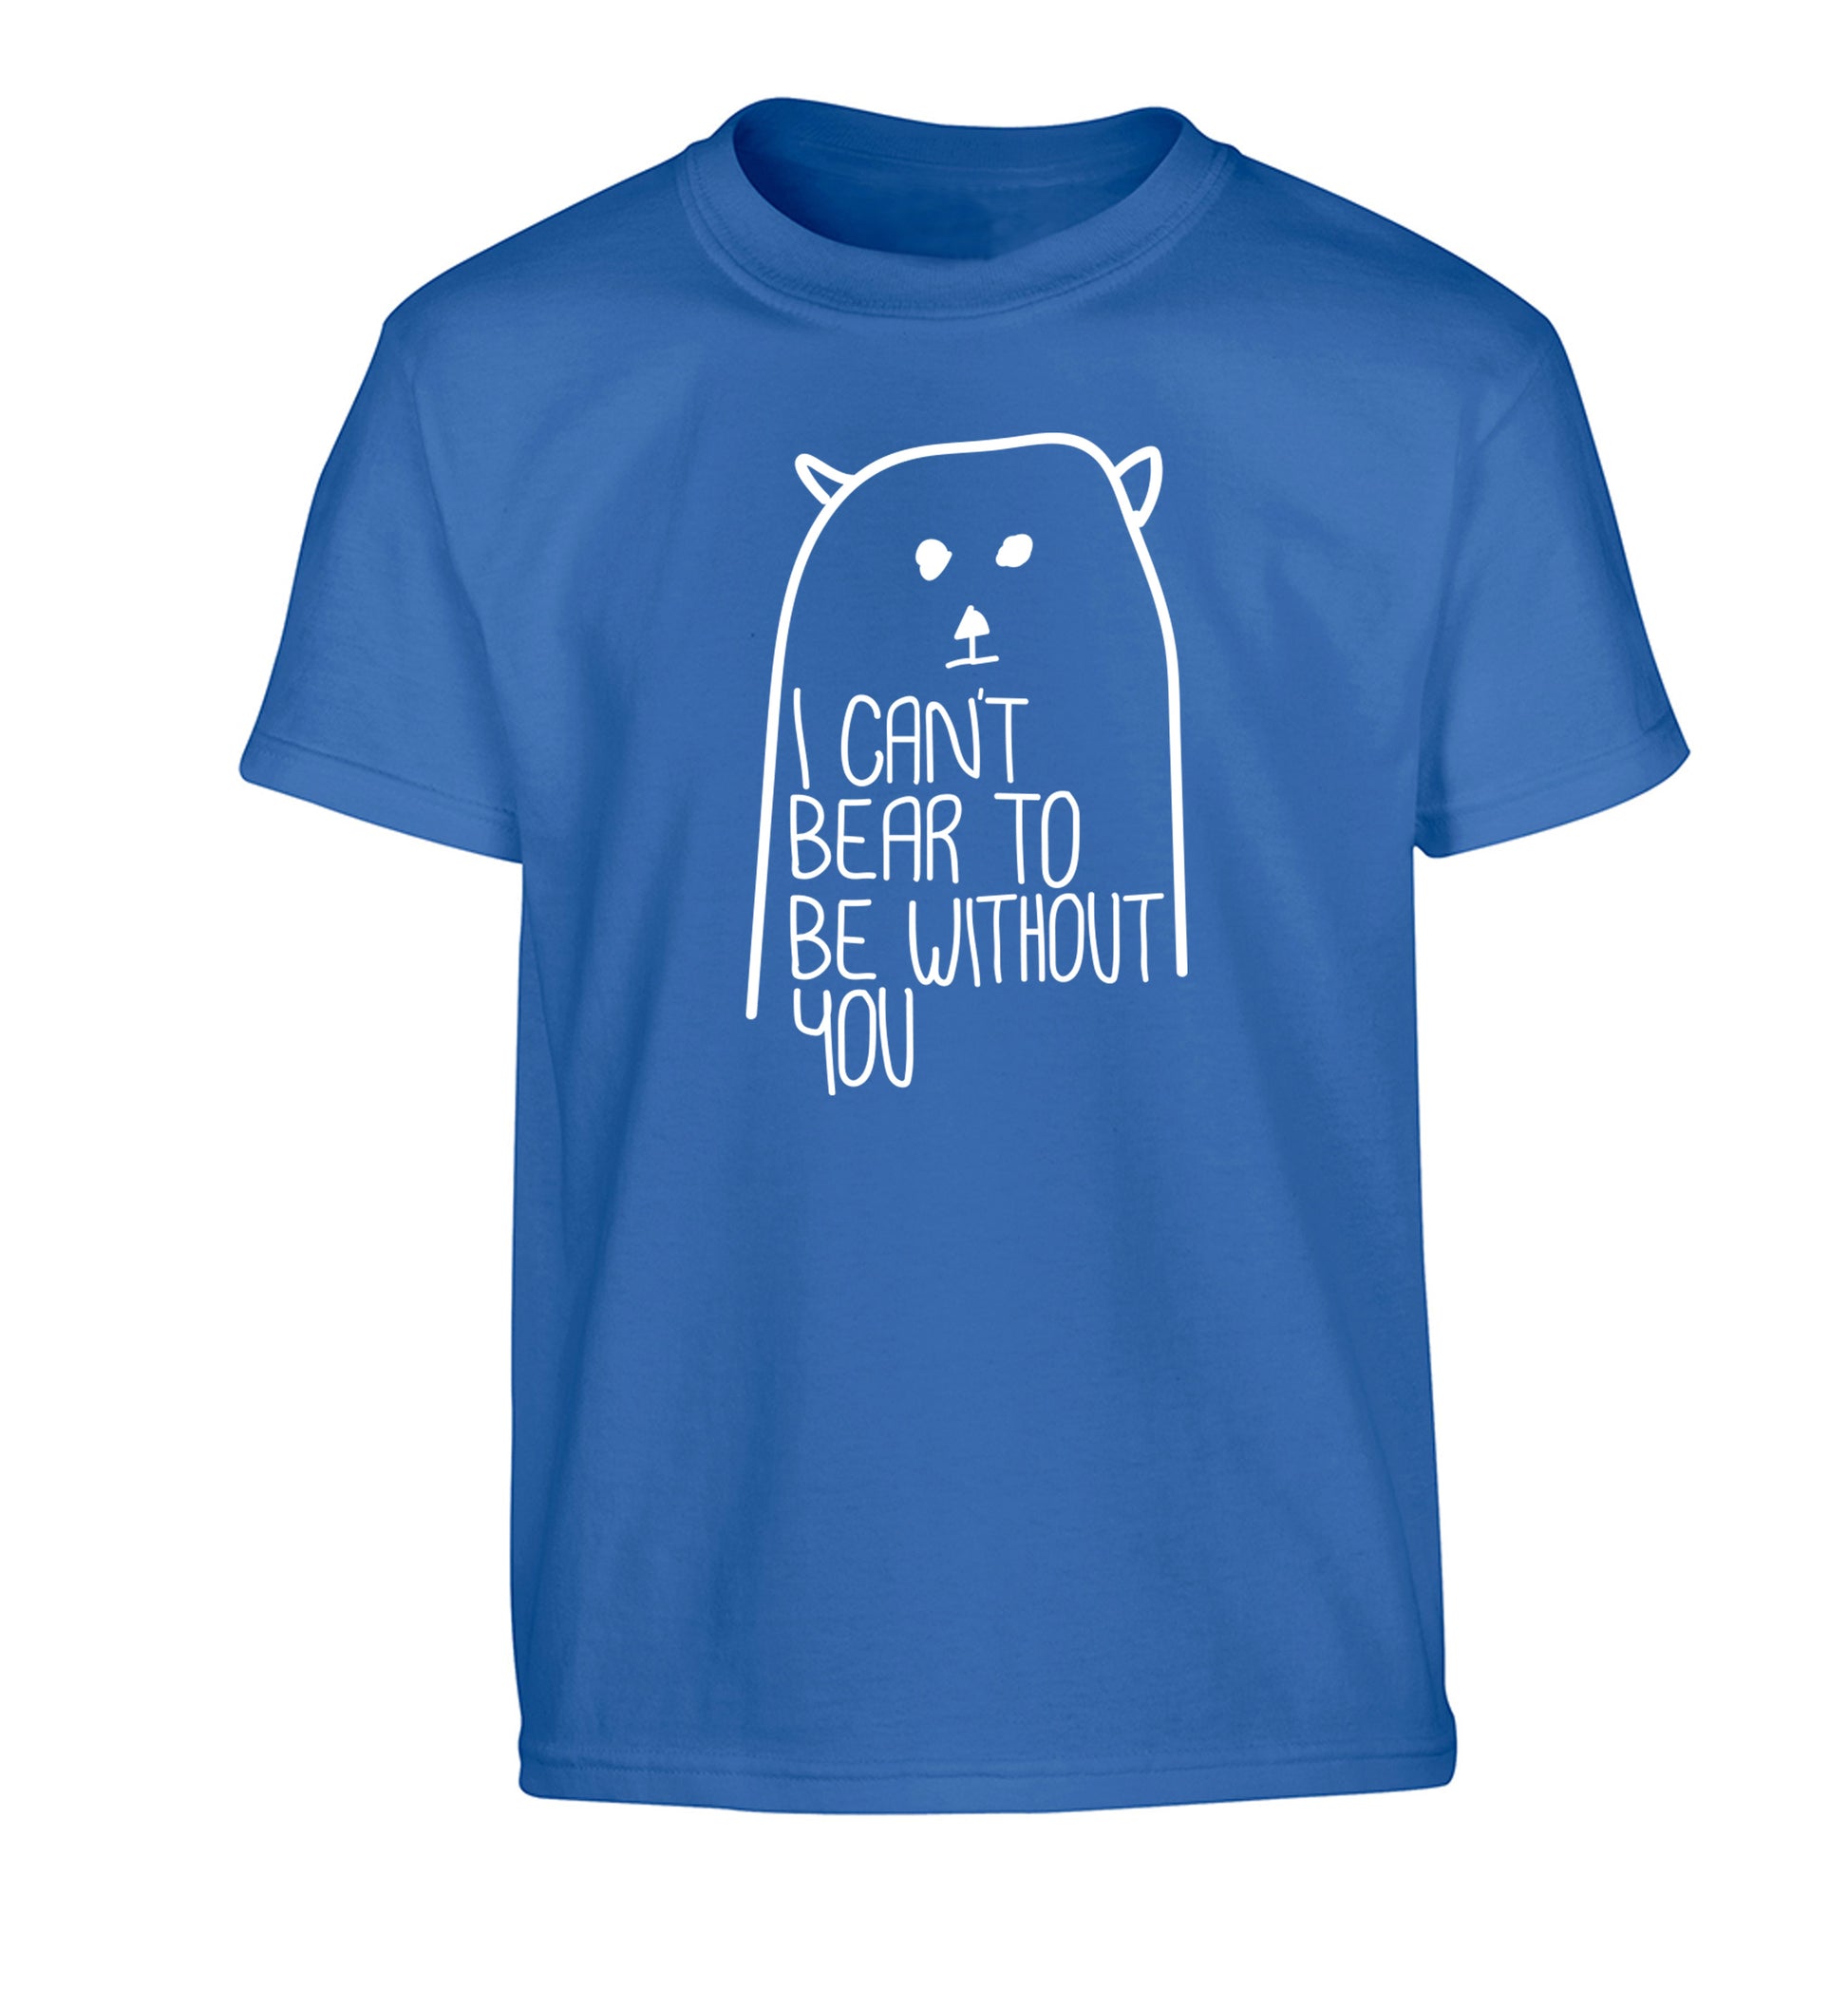 I can't bear to be without you Children's blue Tshirt 12-13 Years